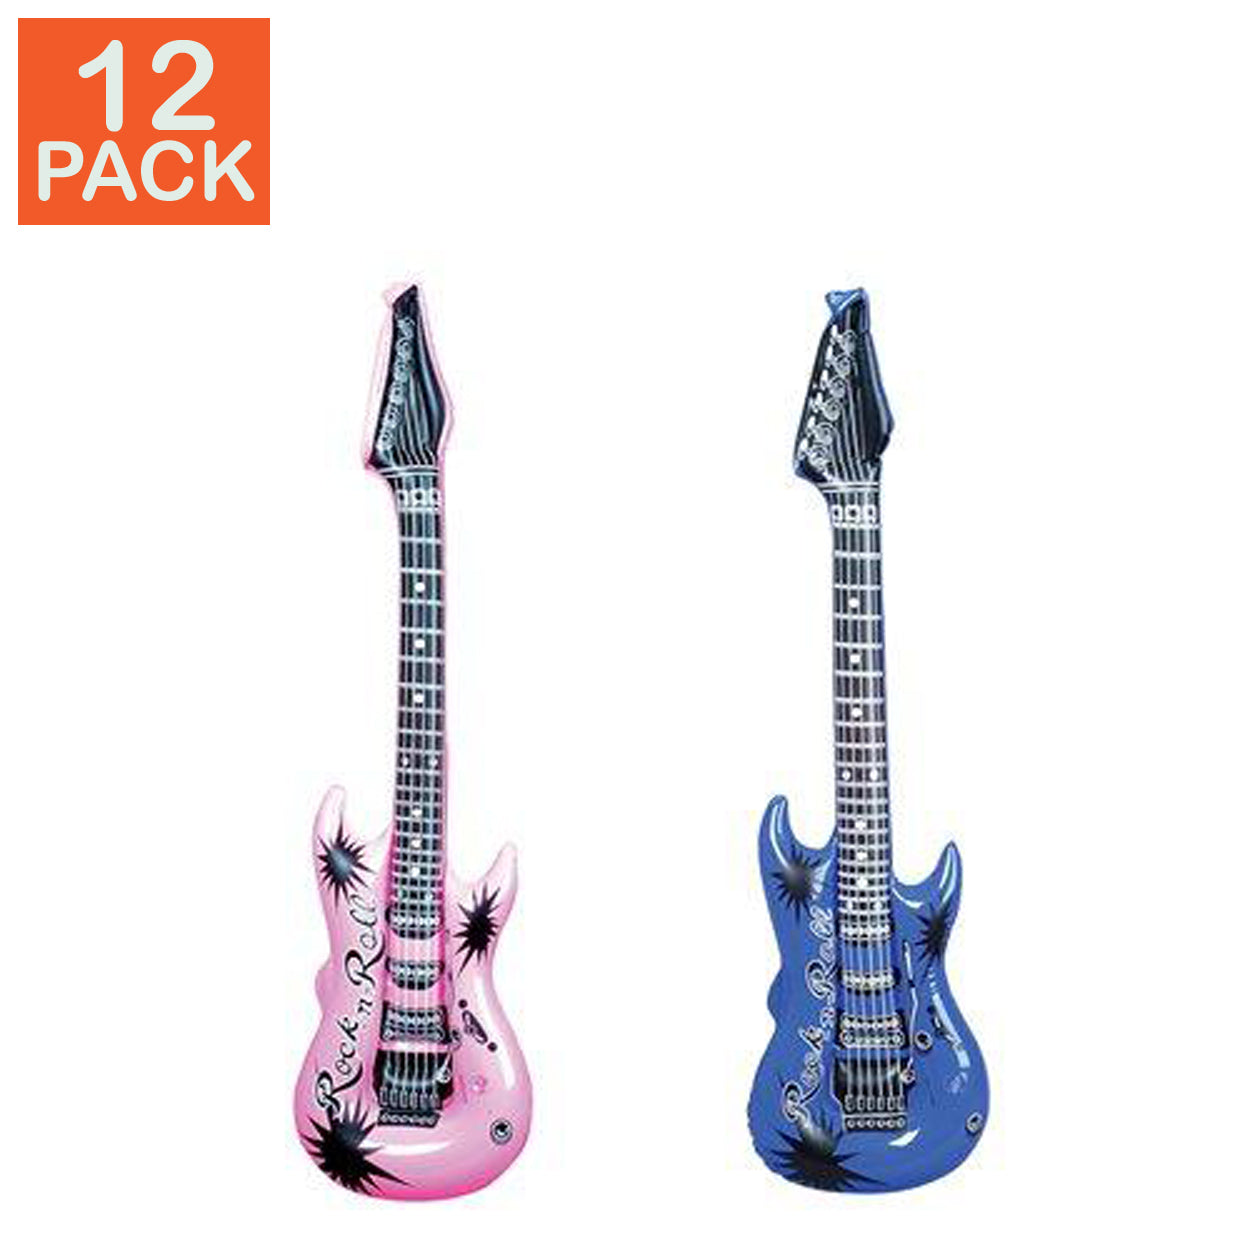 42" Inflatable Guitars  (pack of 12)